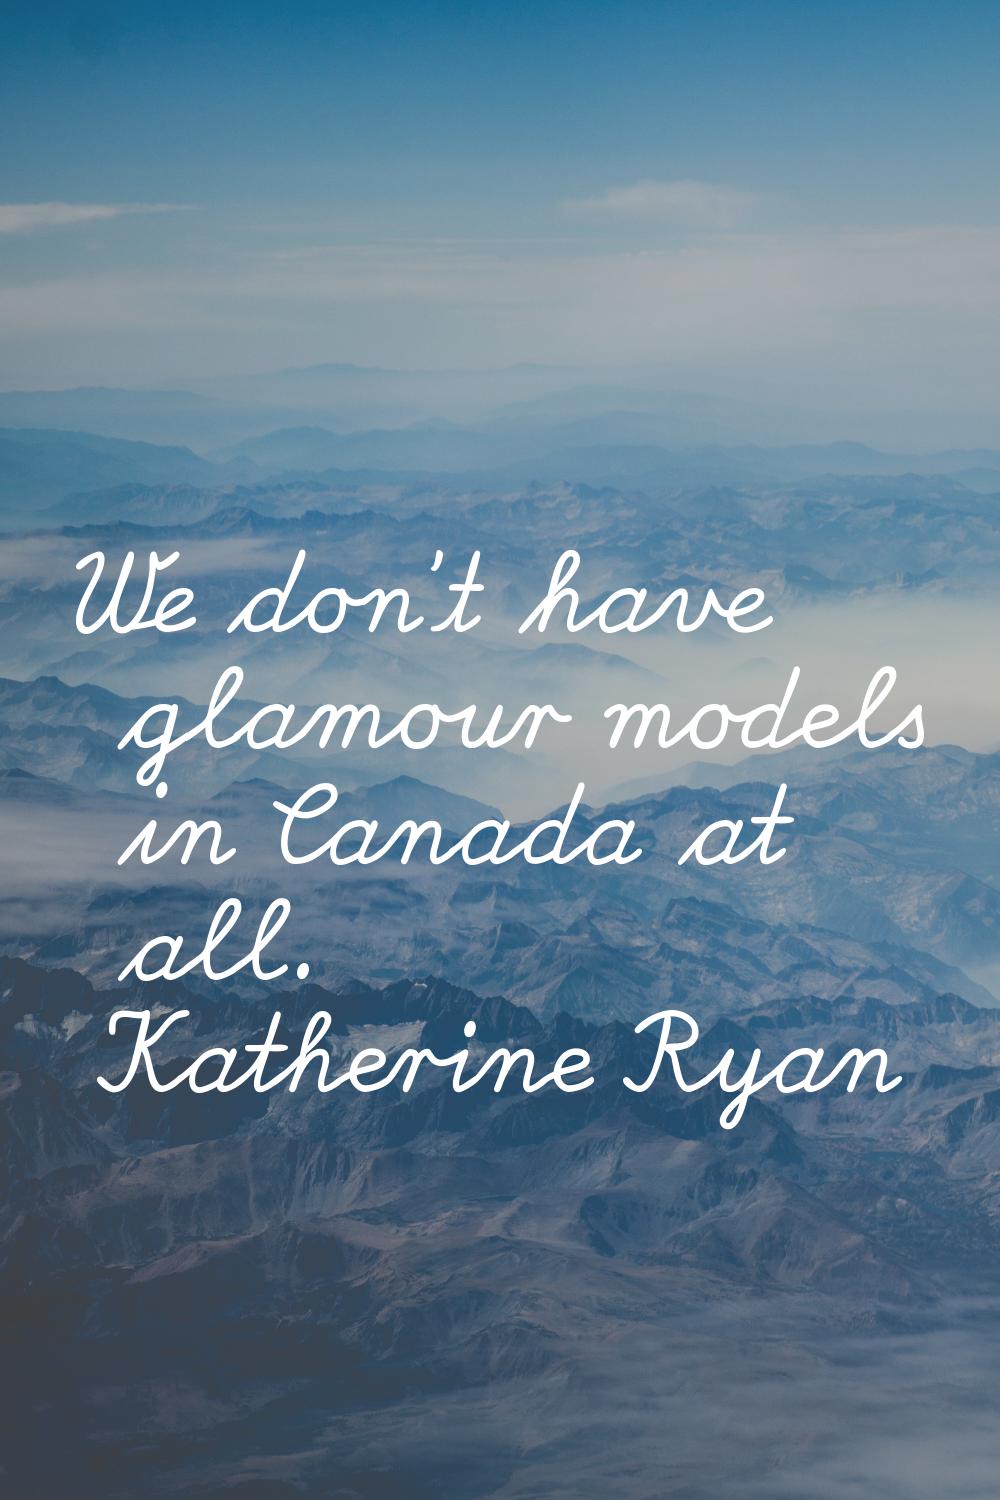 We don't have glamour models in Canada at all.